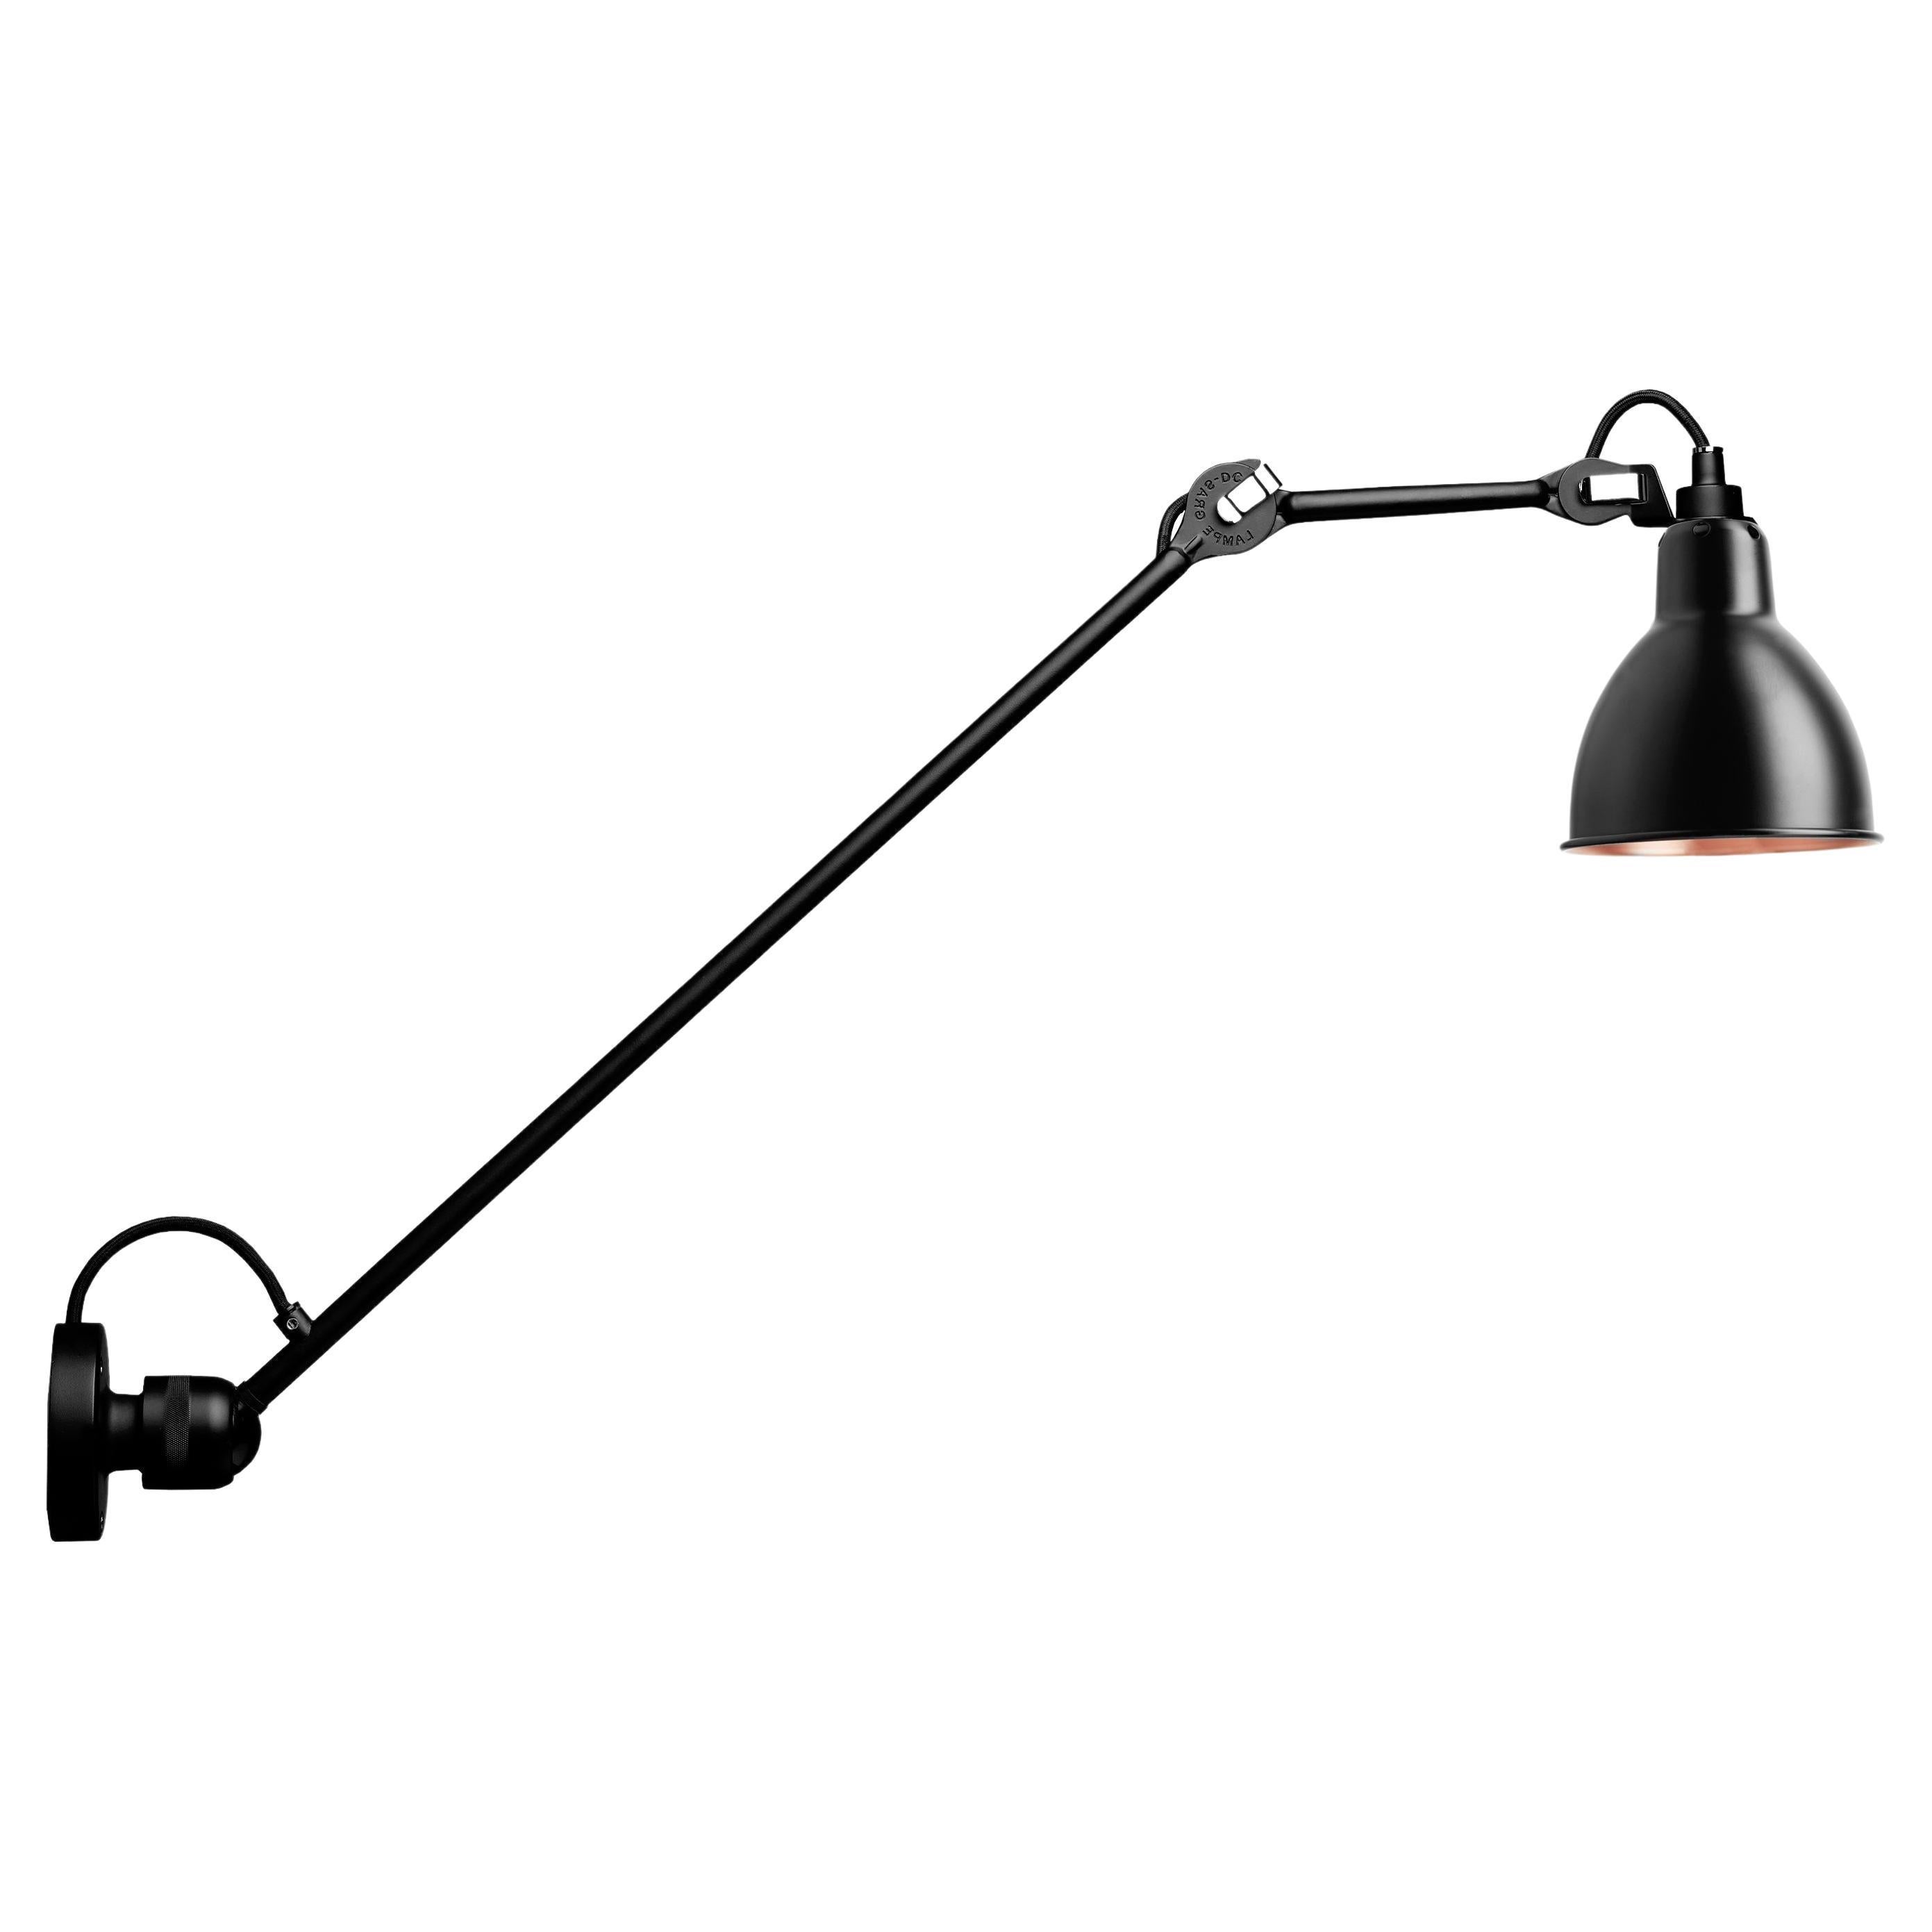 DCW Editions La Lampe Gras N°304 L60 Wall Lamp in Black Arm and Black Copper For Sale